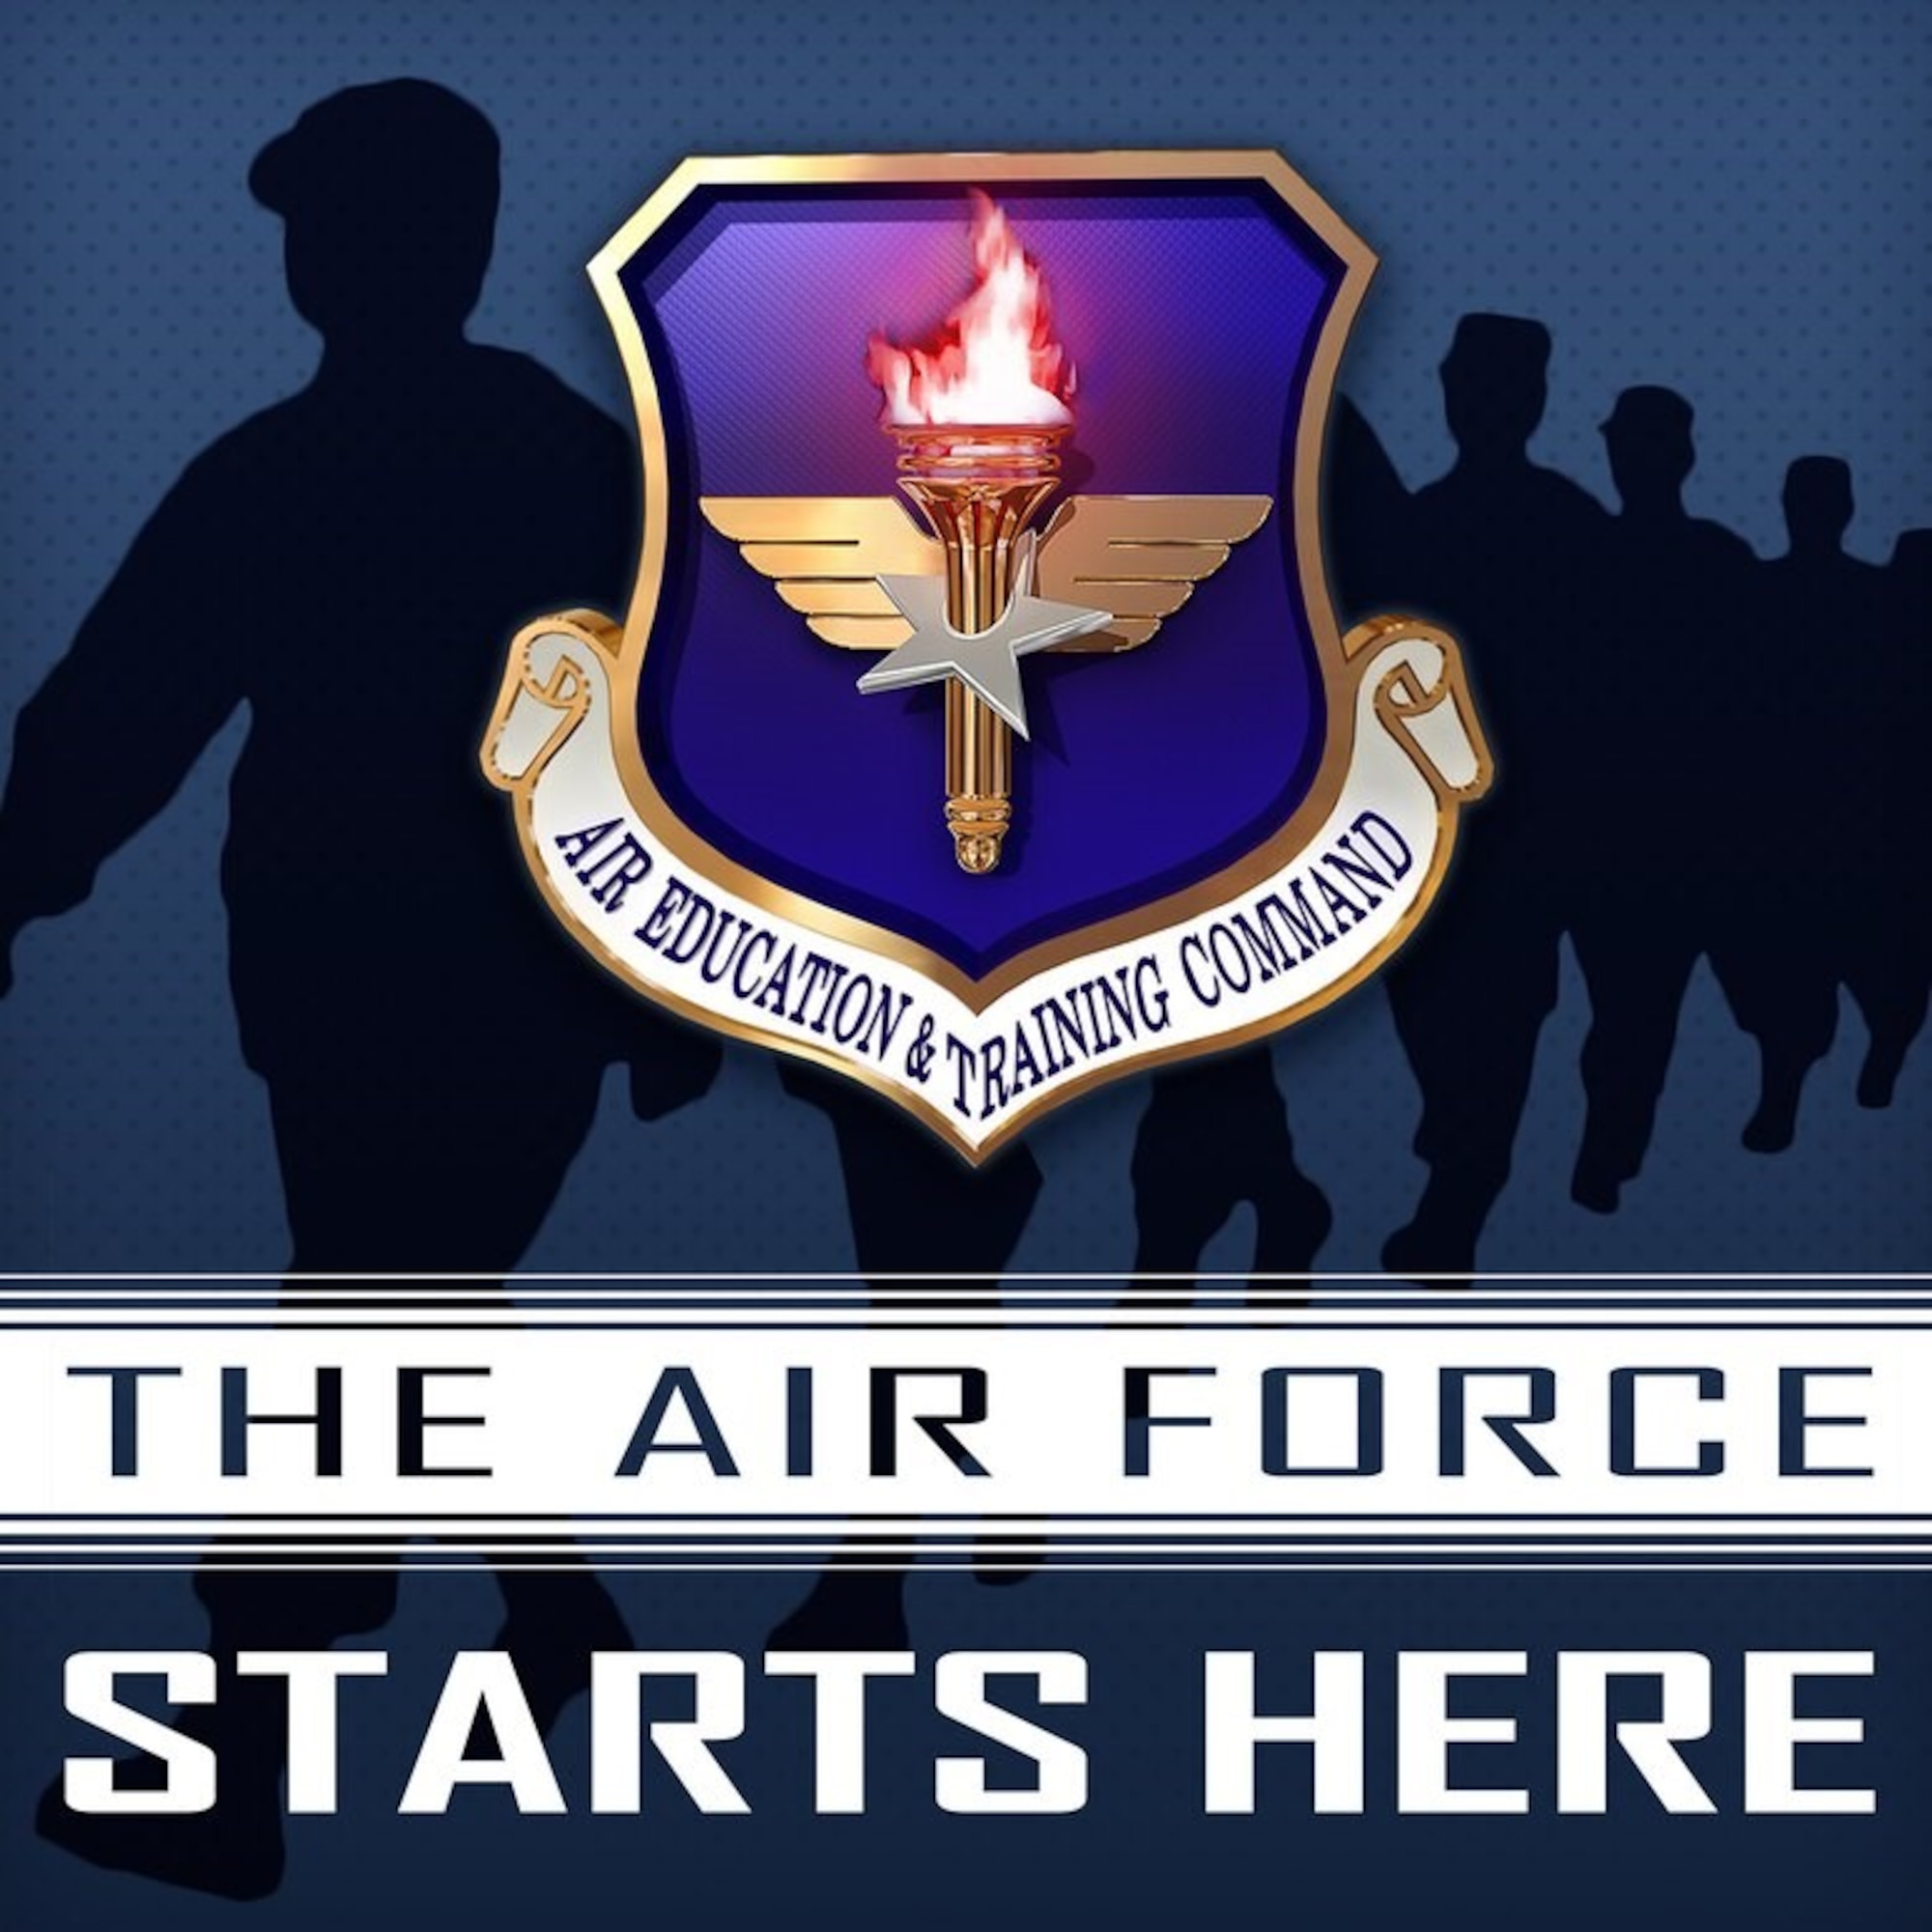 The Air Force Starts Here graphic